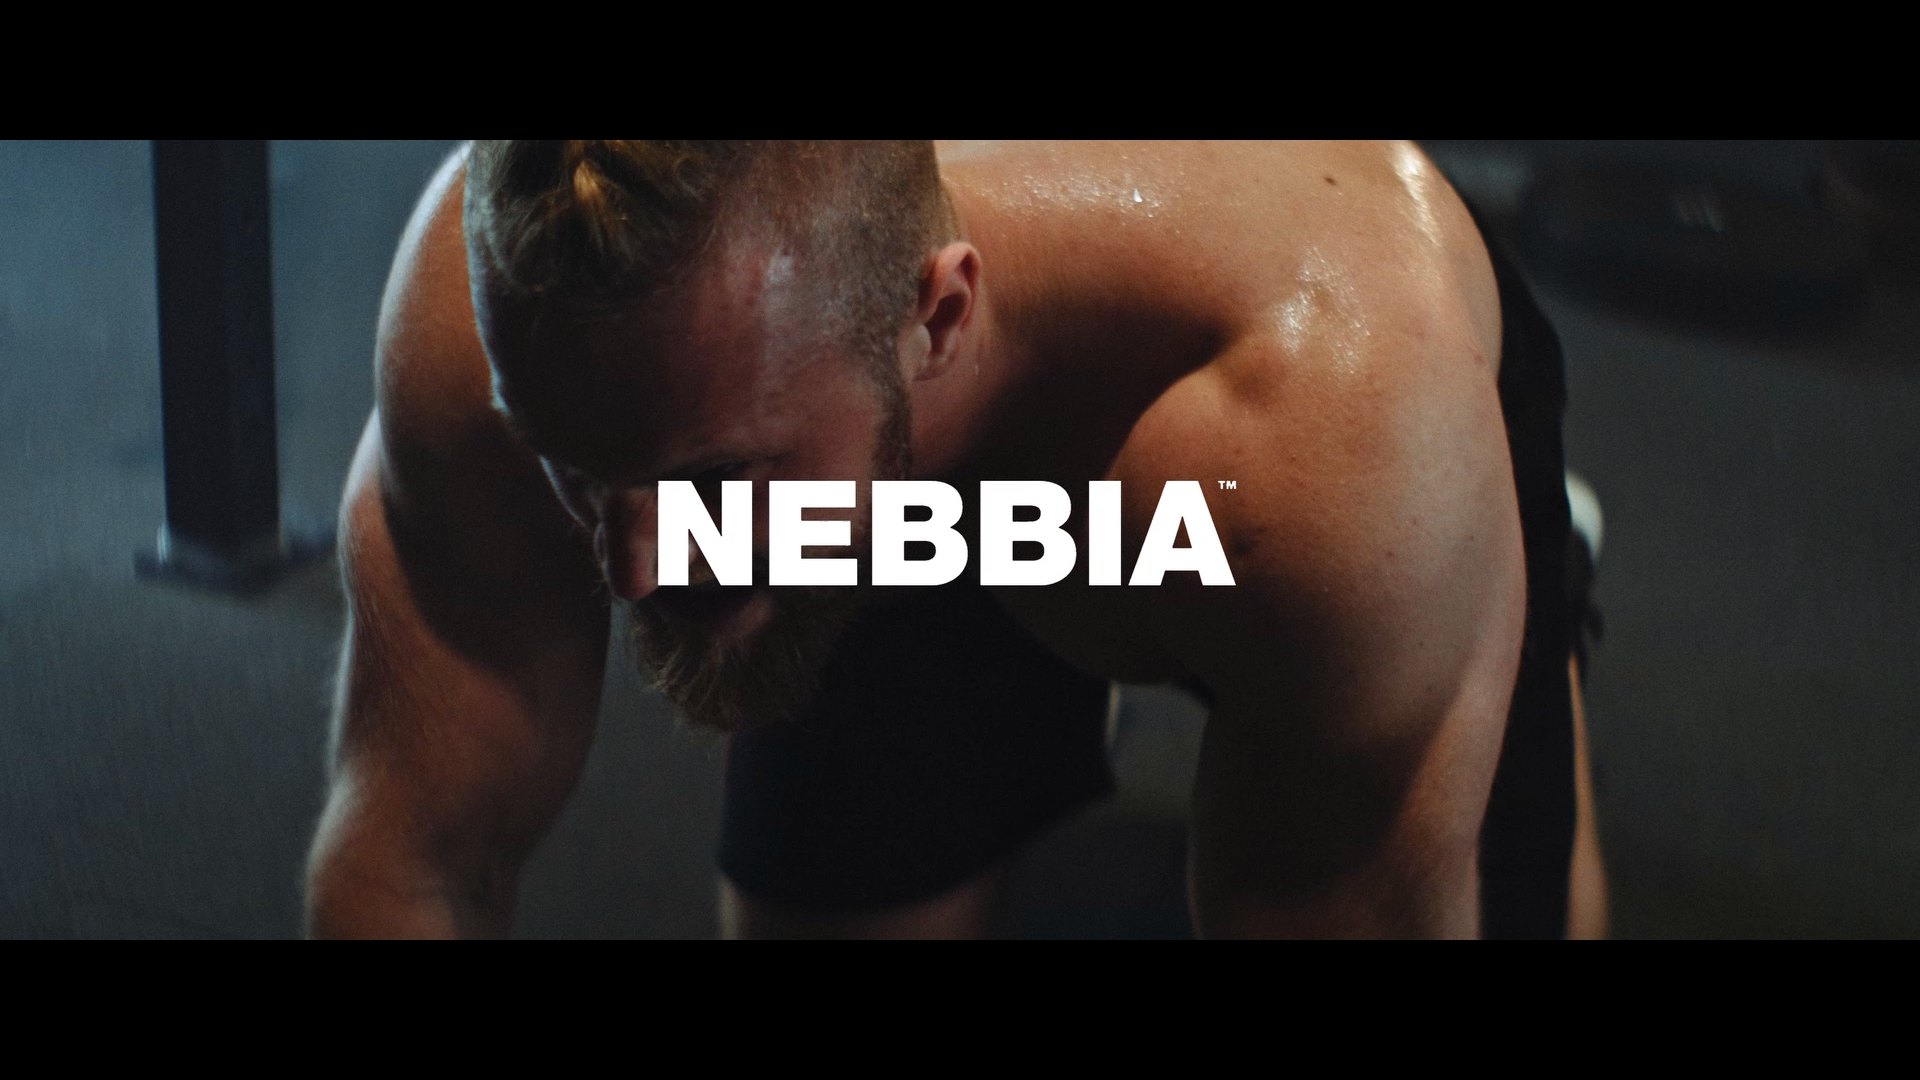 NEBBIA FITNESS x GET OUT OF YOUR COMFORT ZONE